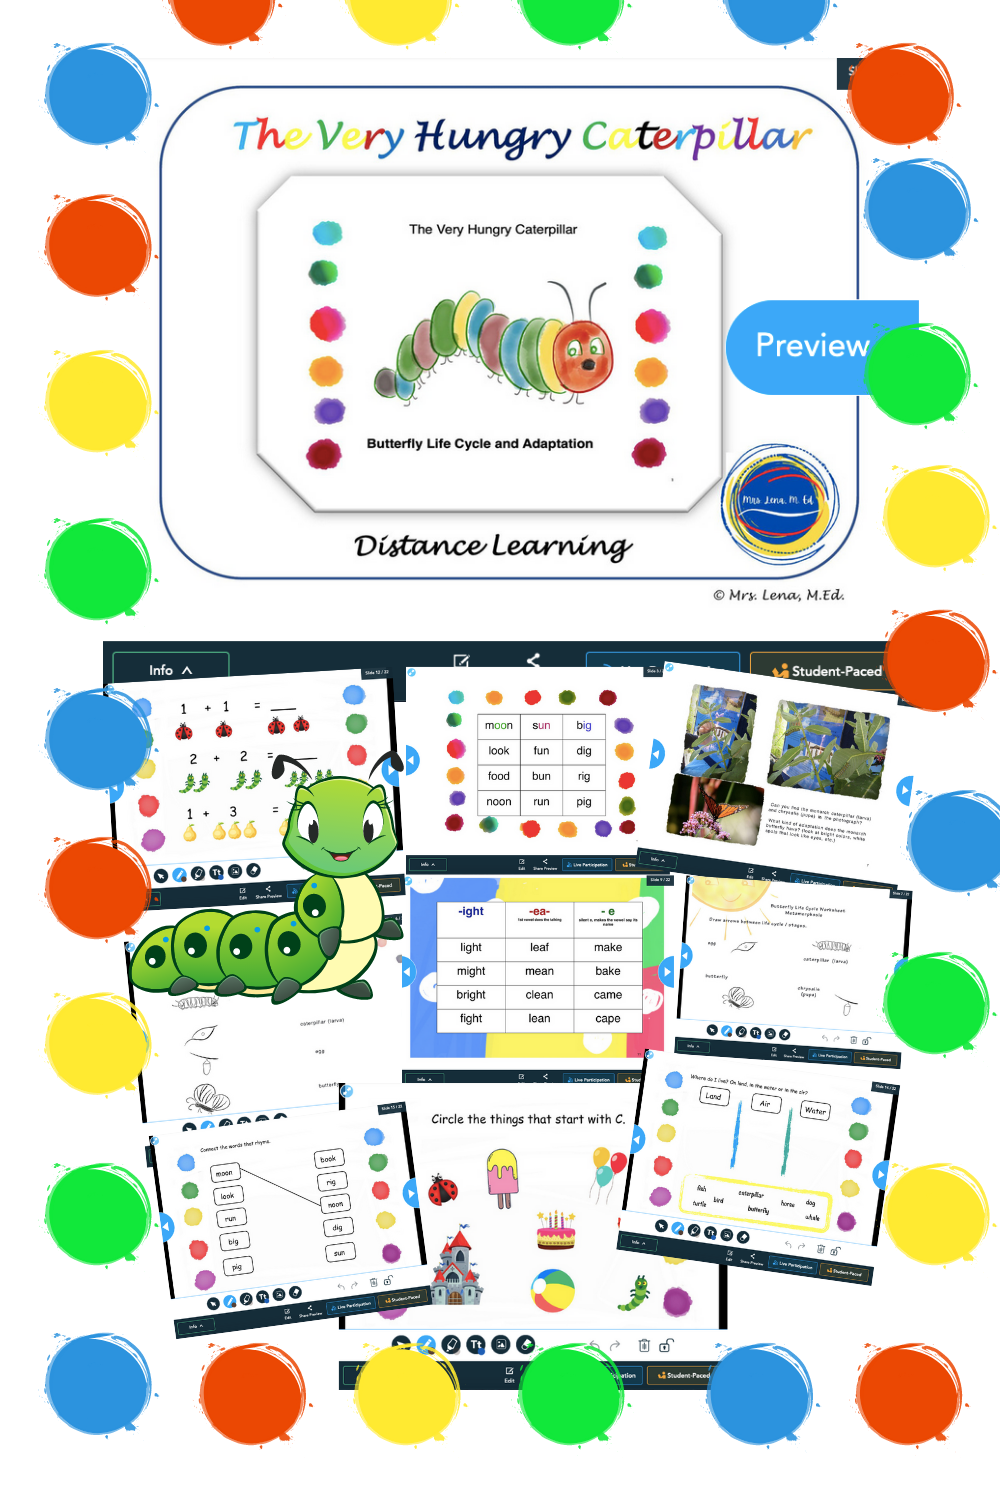 The Very Hungry Caterpillar by Eric Carle Lesson Plan